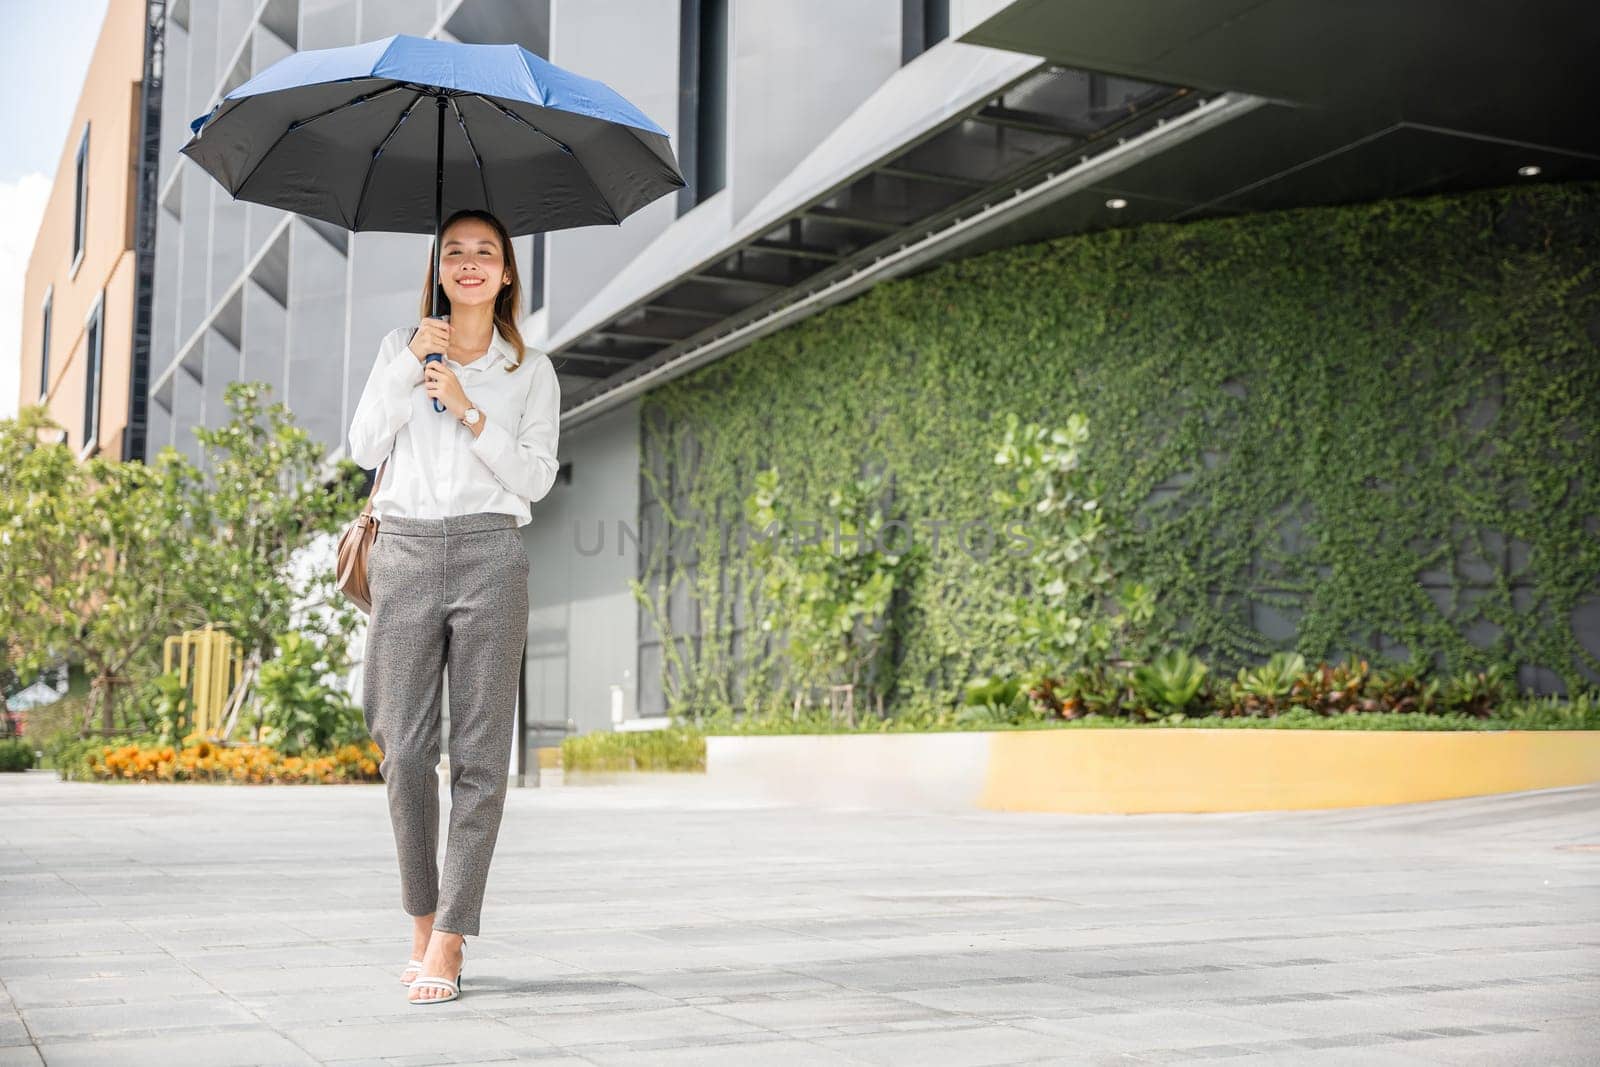 Walking to the office on a hot day, a young businesswoman holds an umbrella to protect herself from the sun rays. Her professional demeanor and makeup reflect her determination and success.